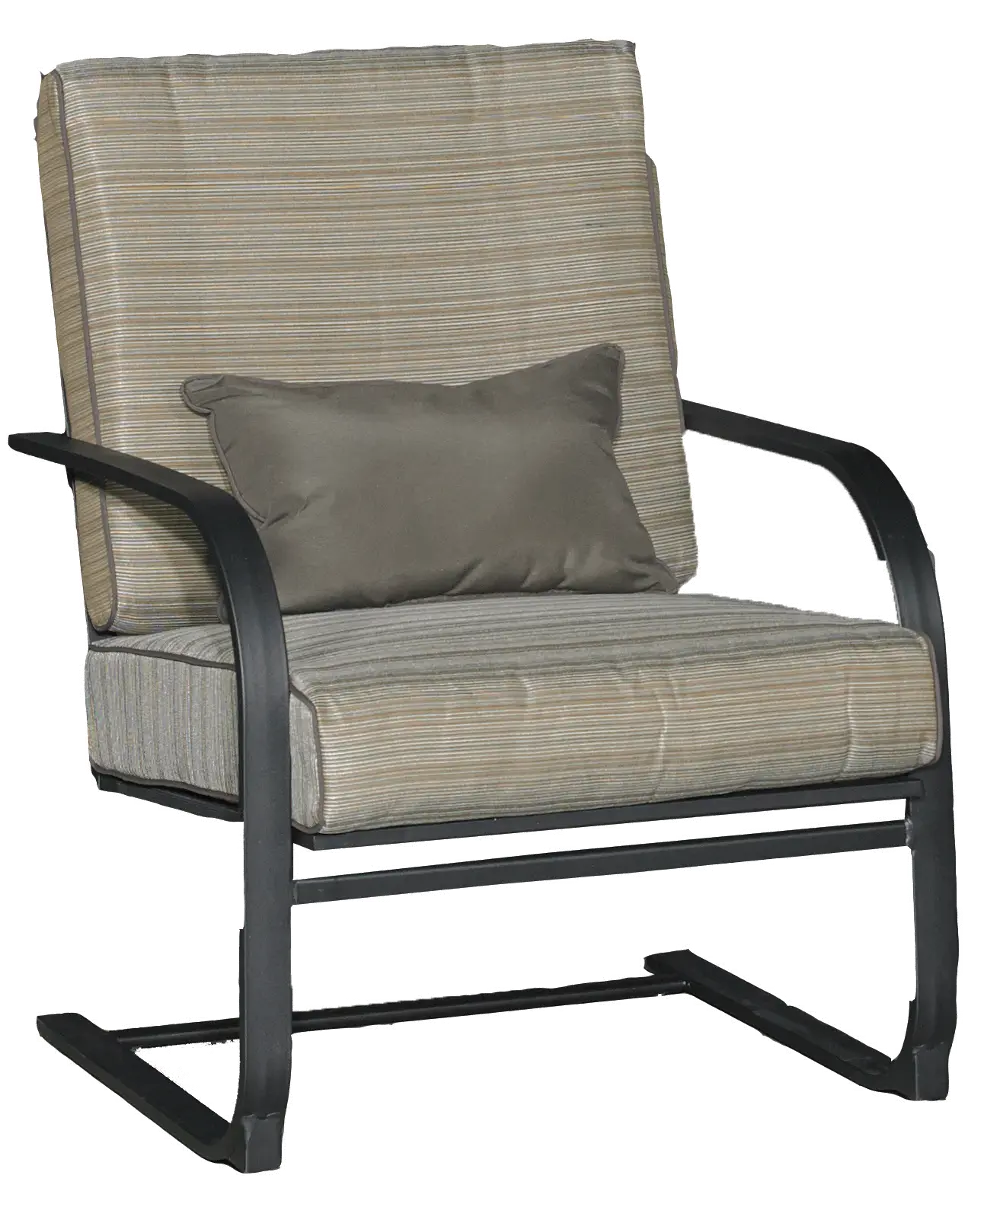 KTS834G/SPRINGCHAIR Spring Outdoor Patio Lounge Chair - Revere-1